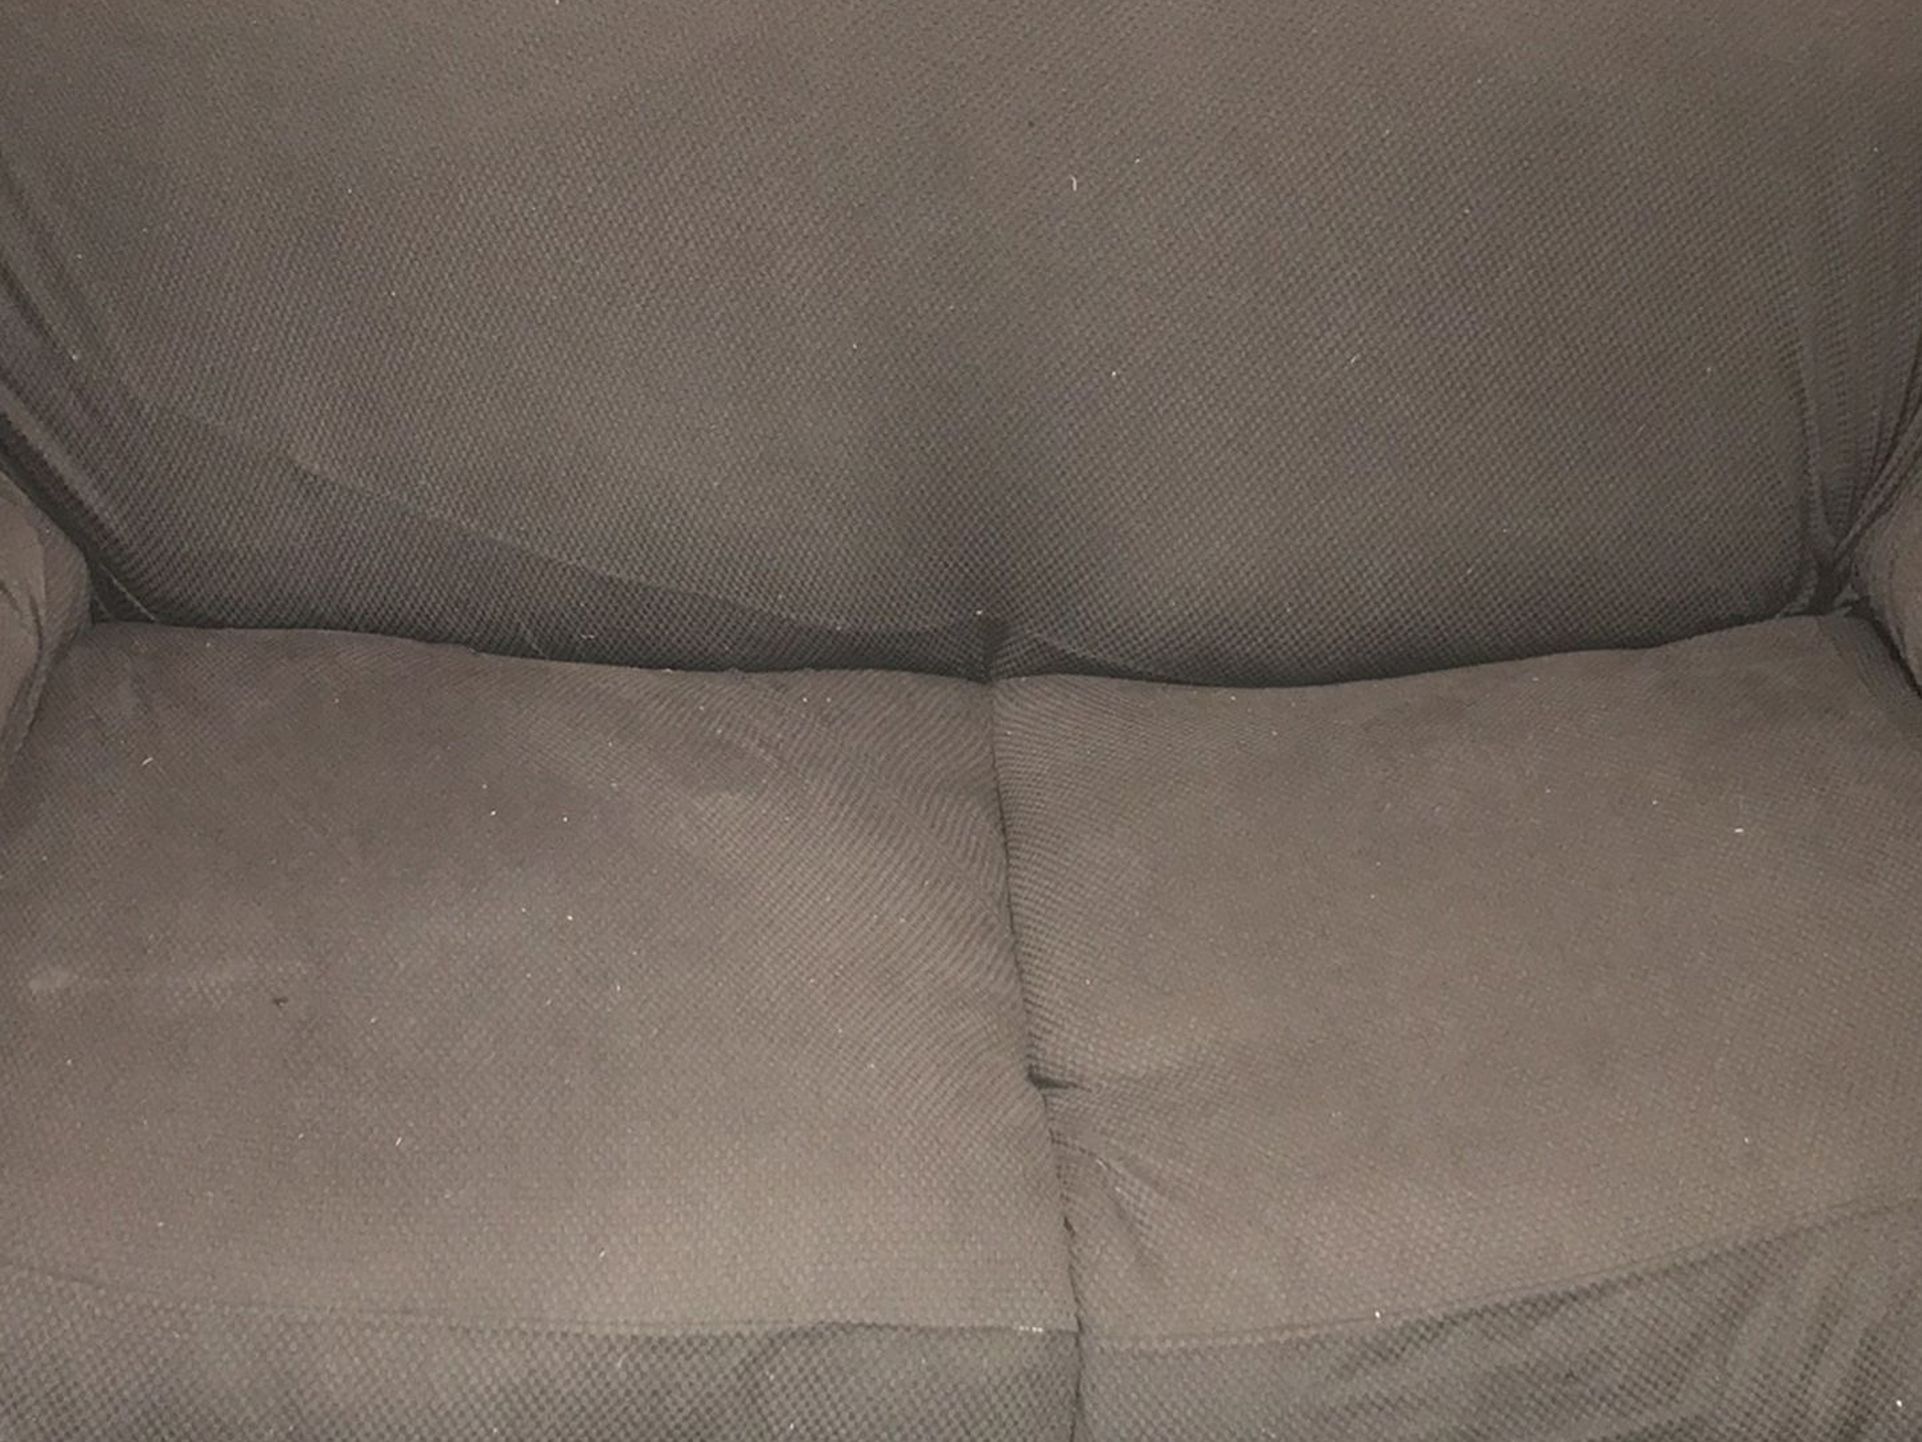 COUCH FOR FREE MUST PICKUP BEFORE MONDAY